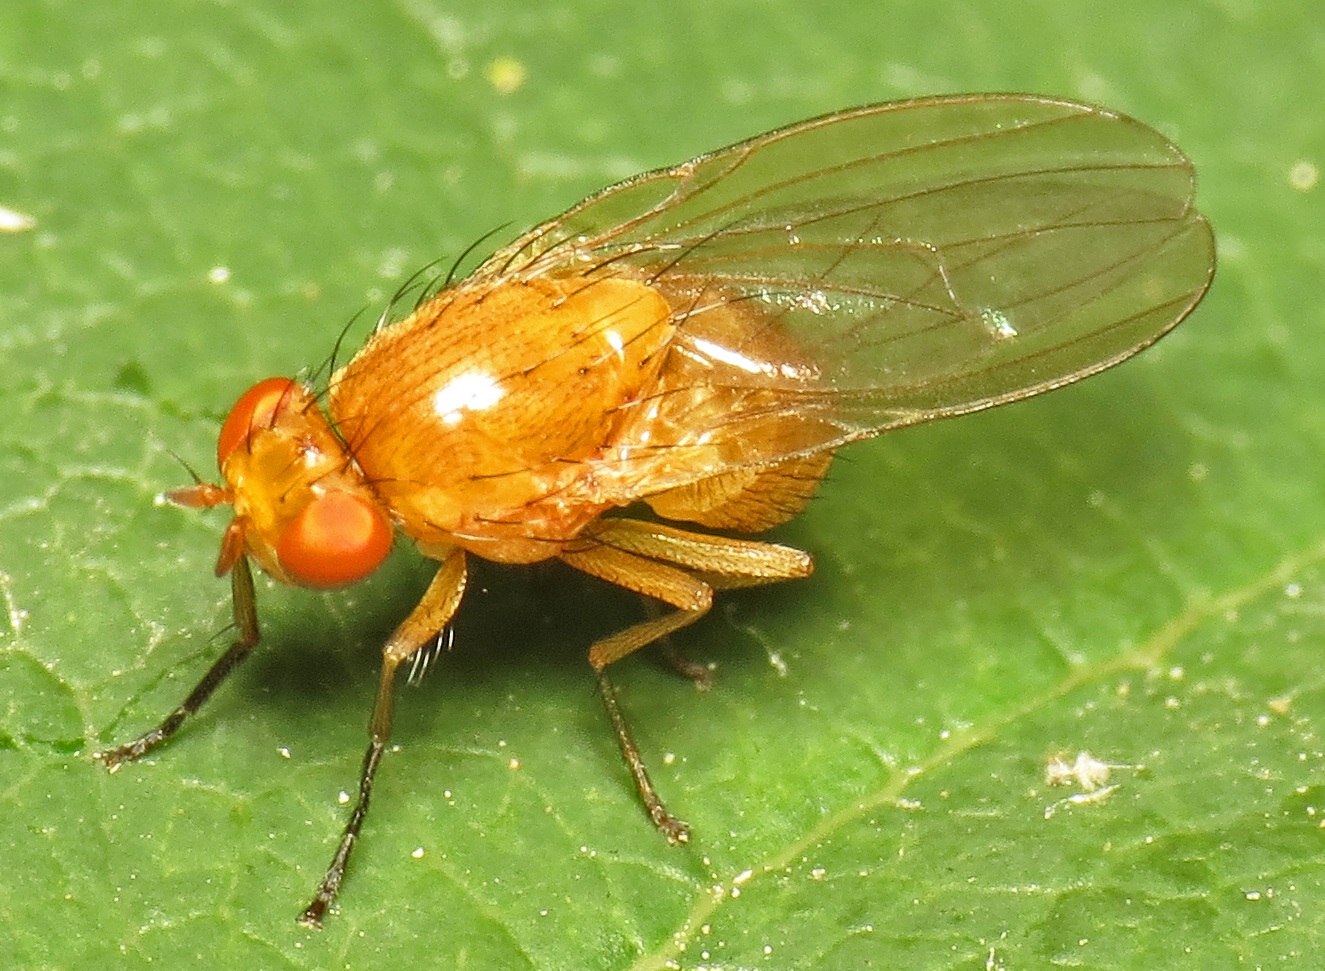 a fly with long legs and head resting on the green surface